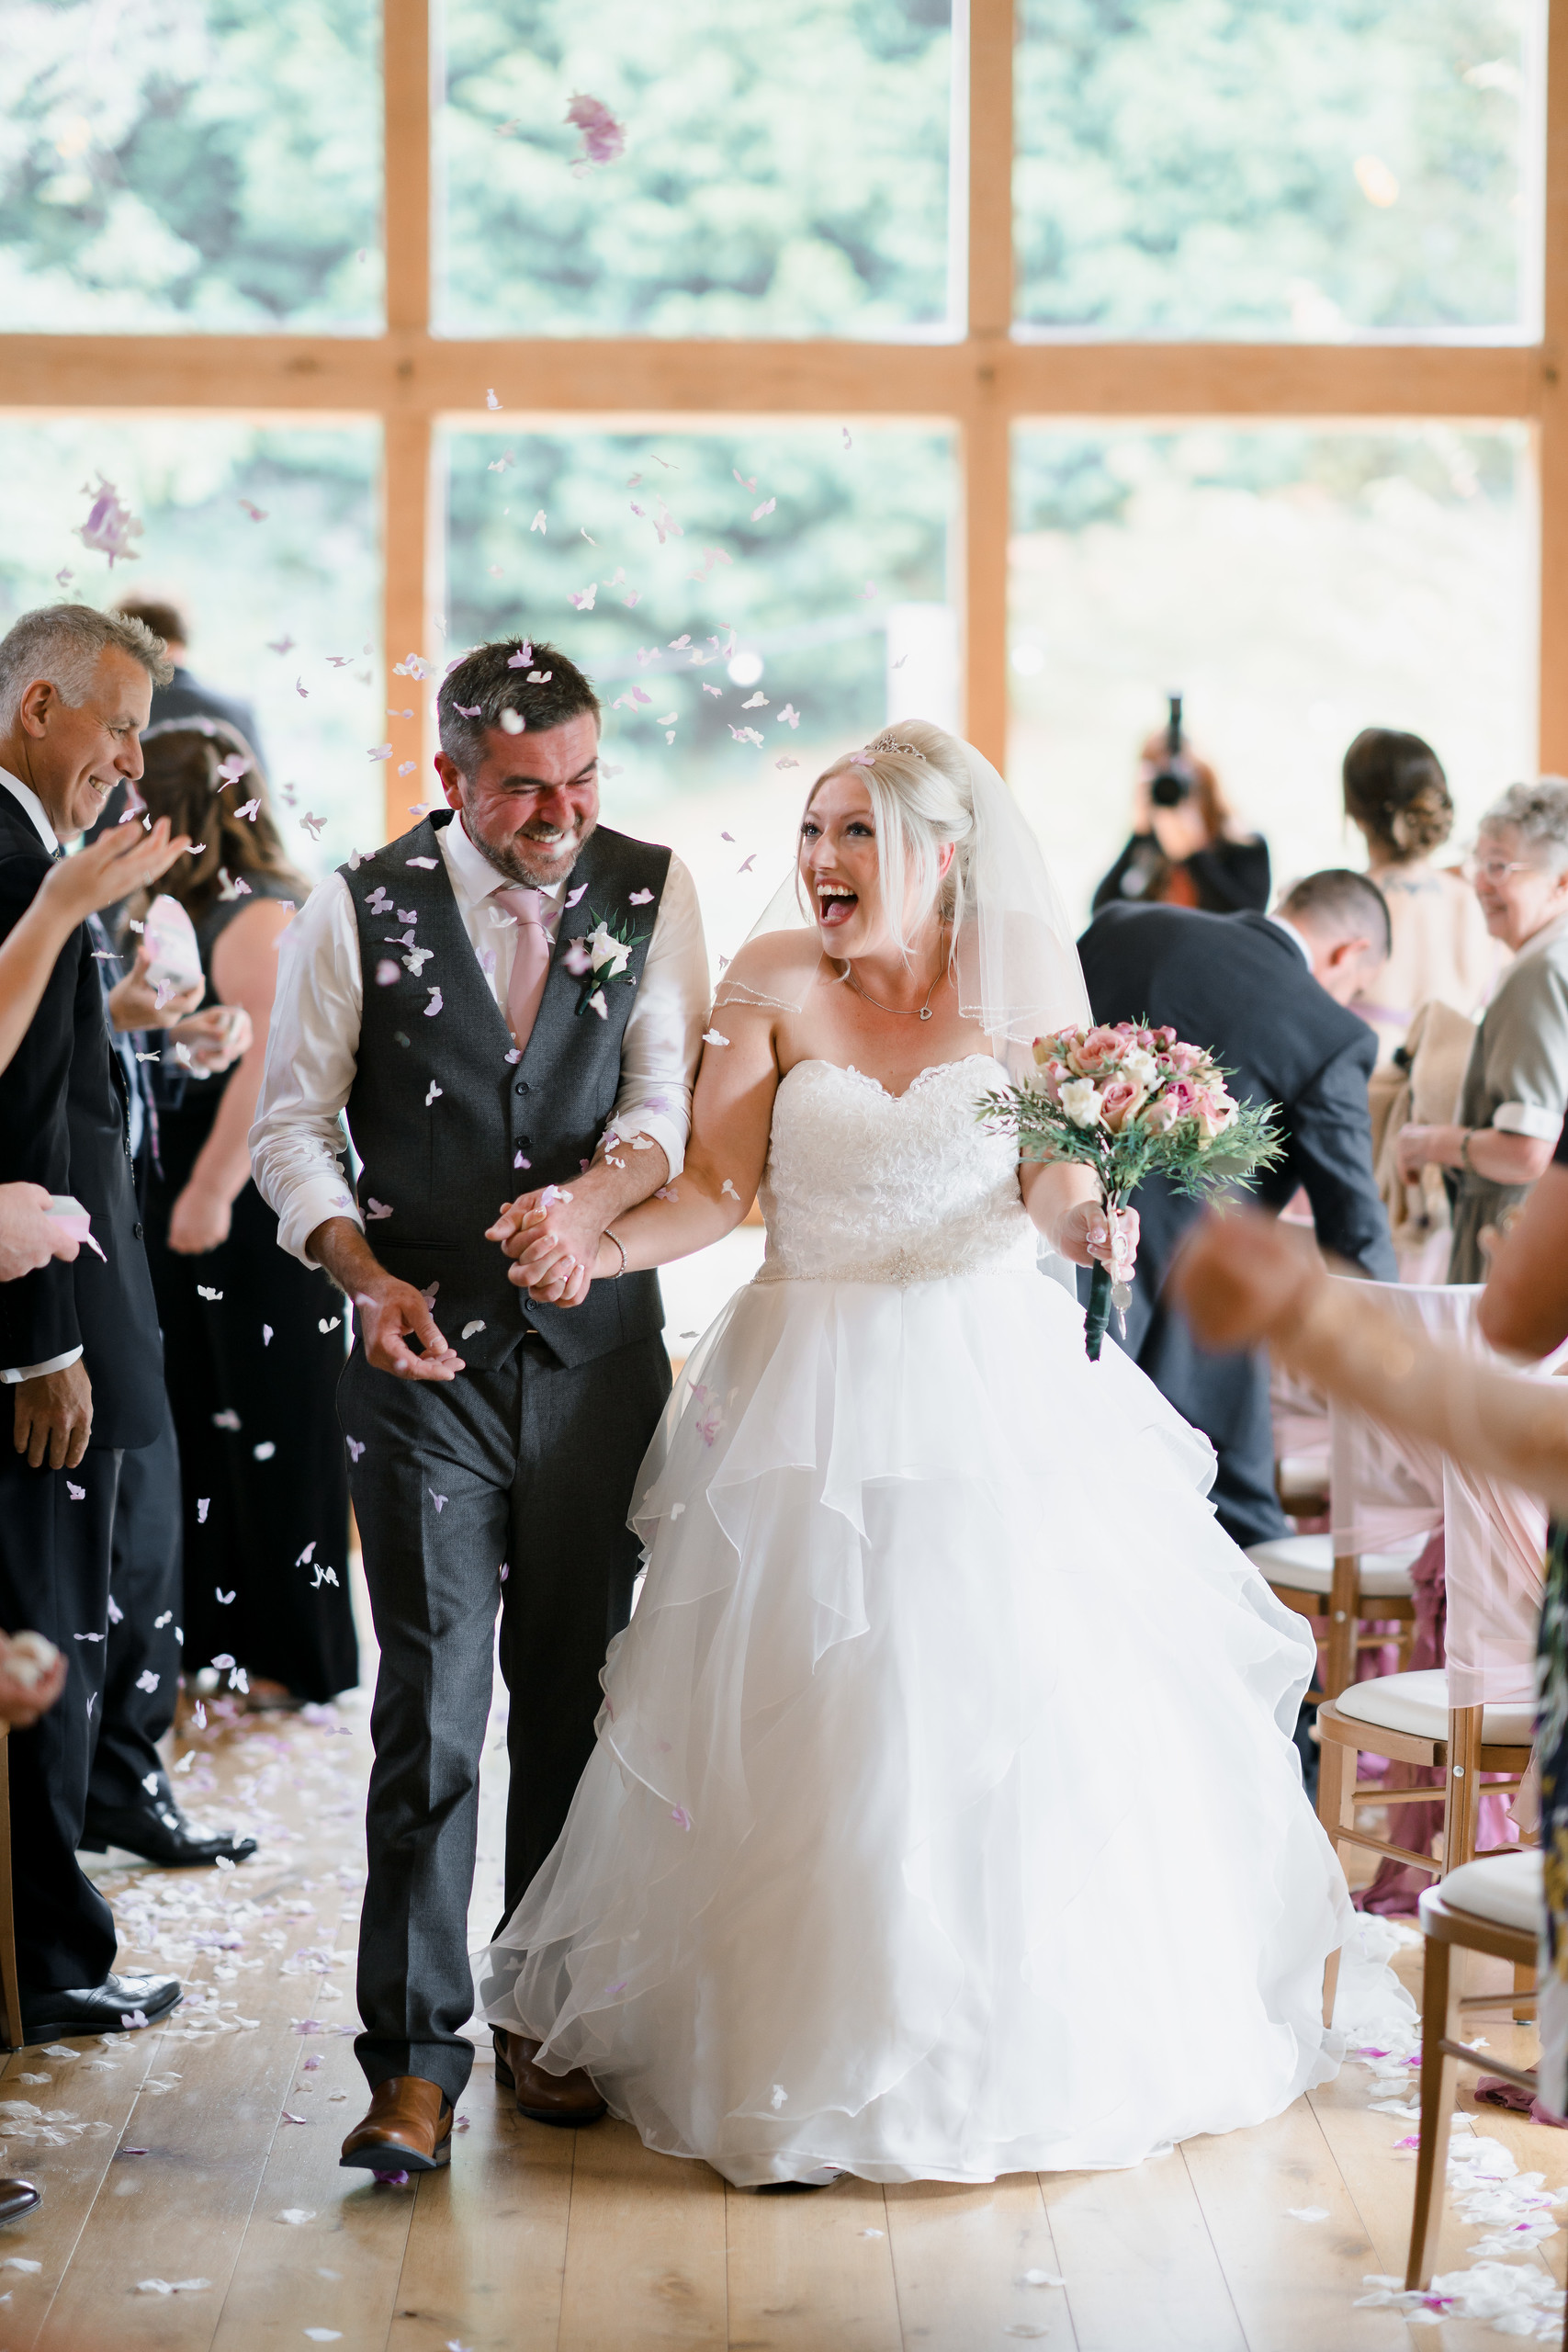 Bride and groom walk back up the aisle together as family and friends throw confetti